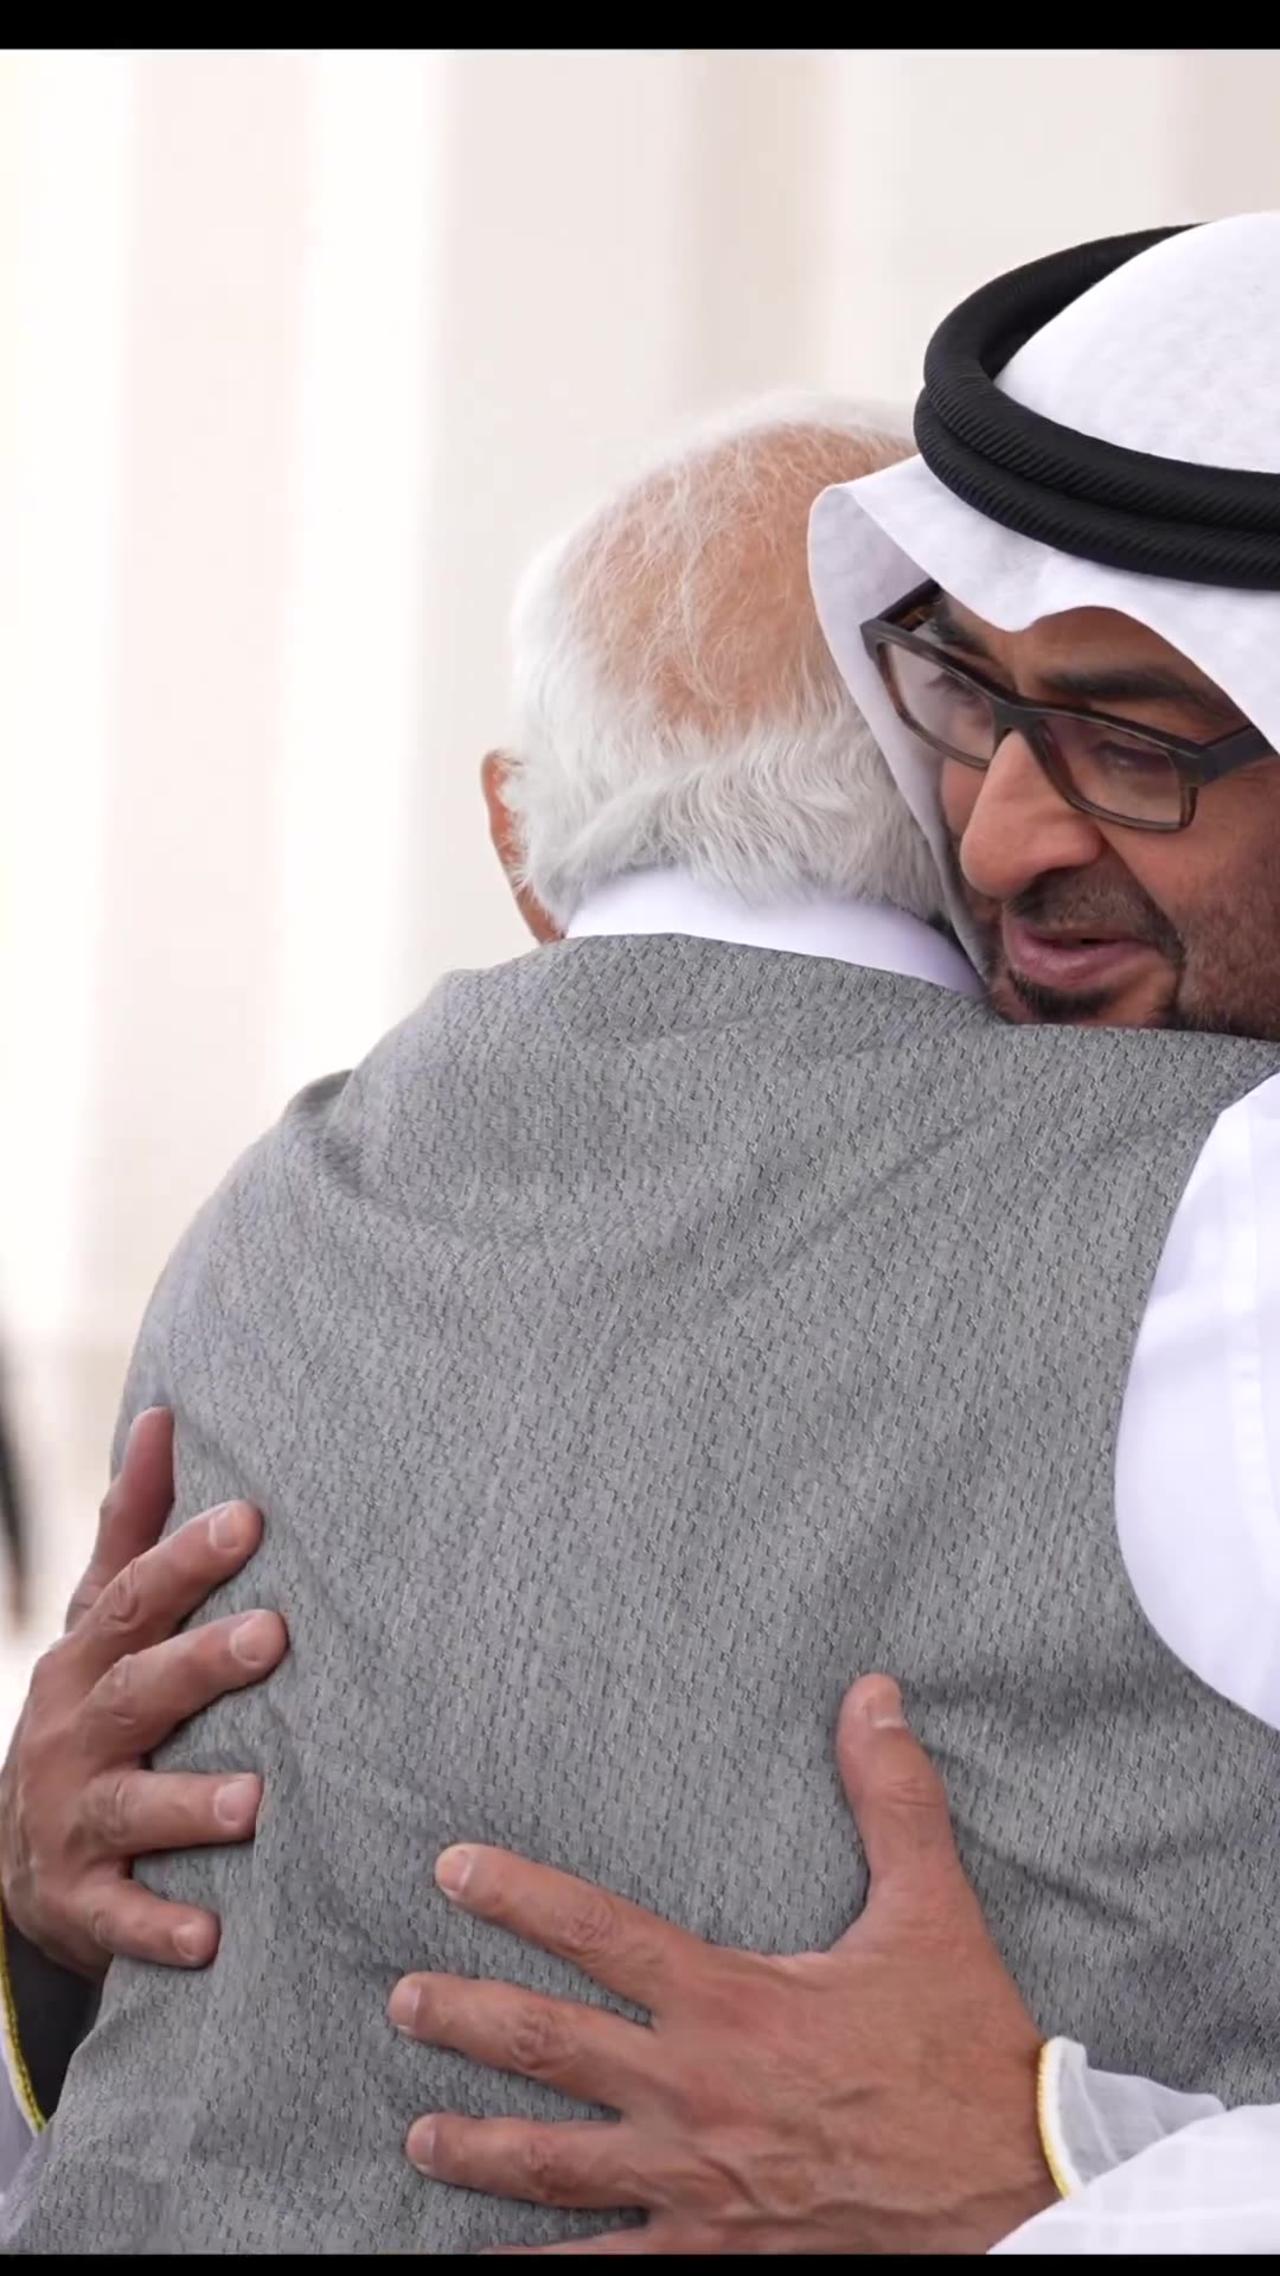 India and UAE will keep working closely to further global good